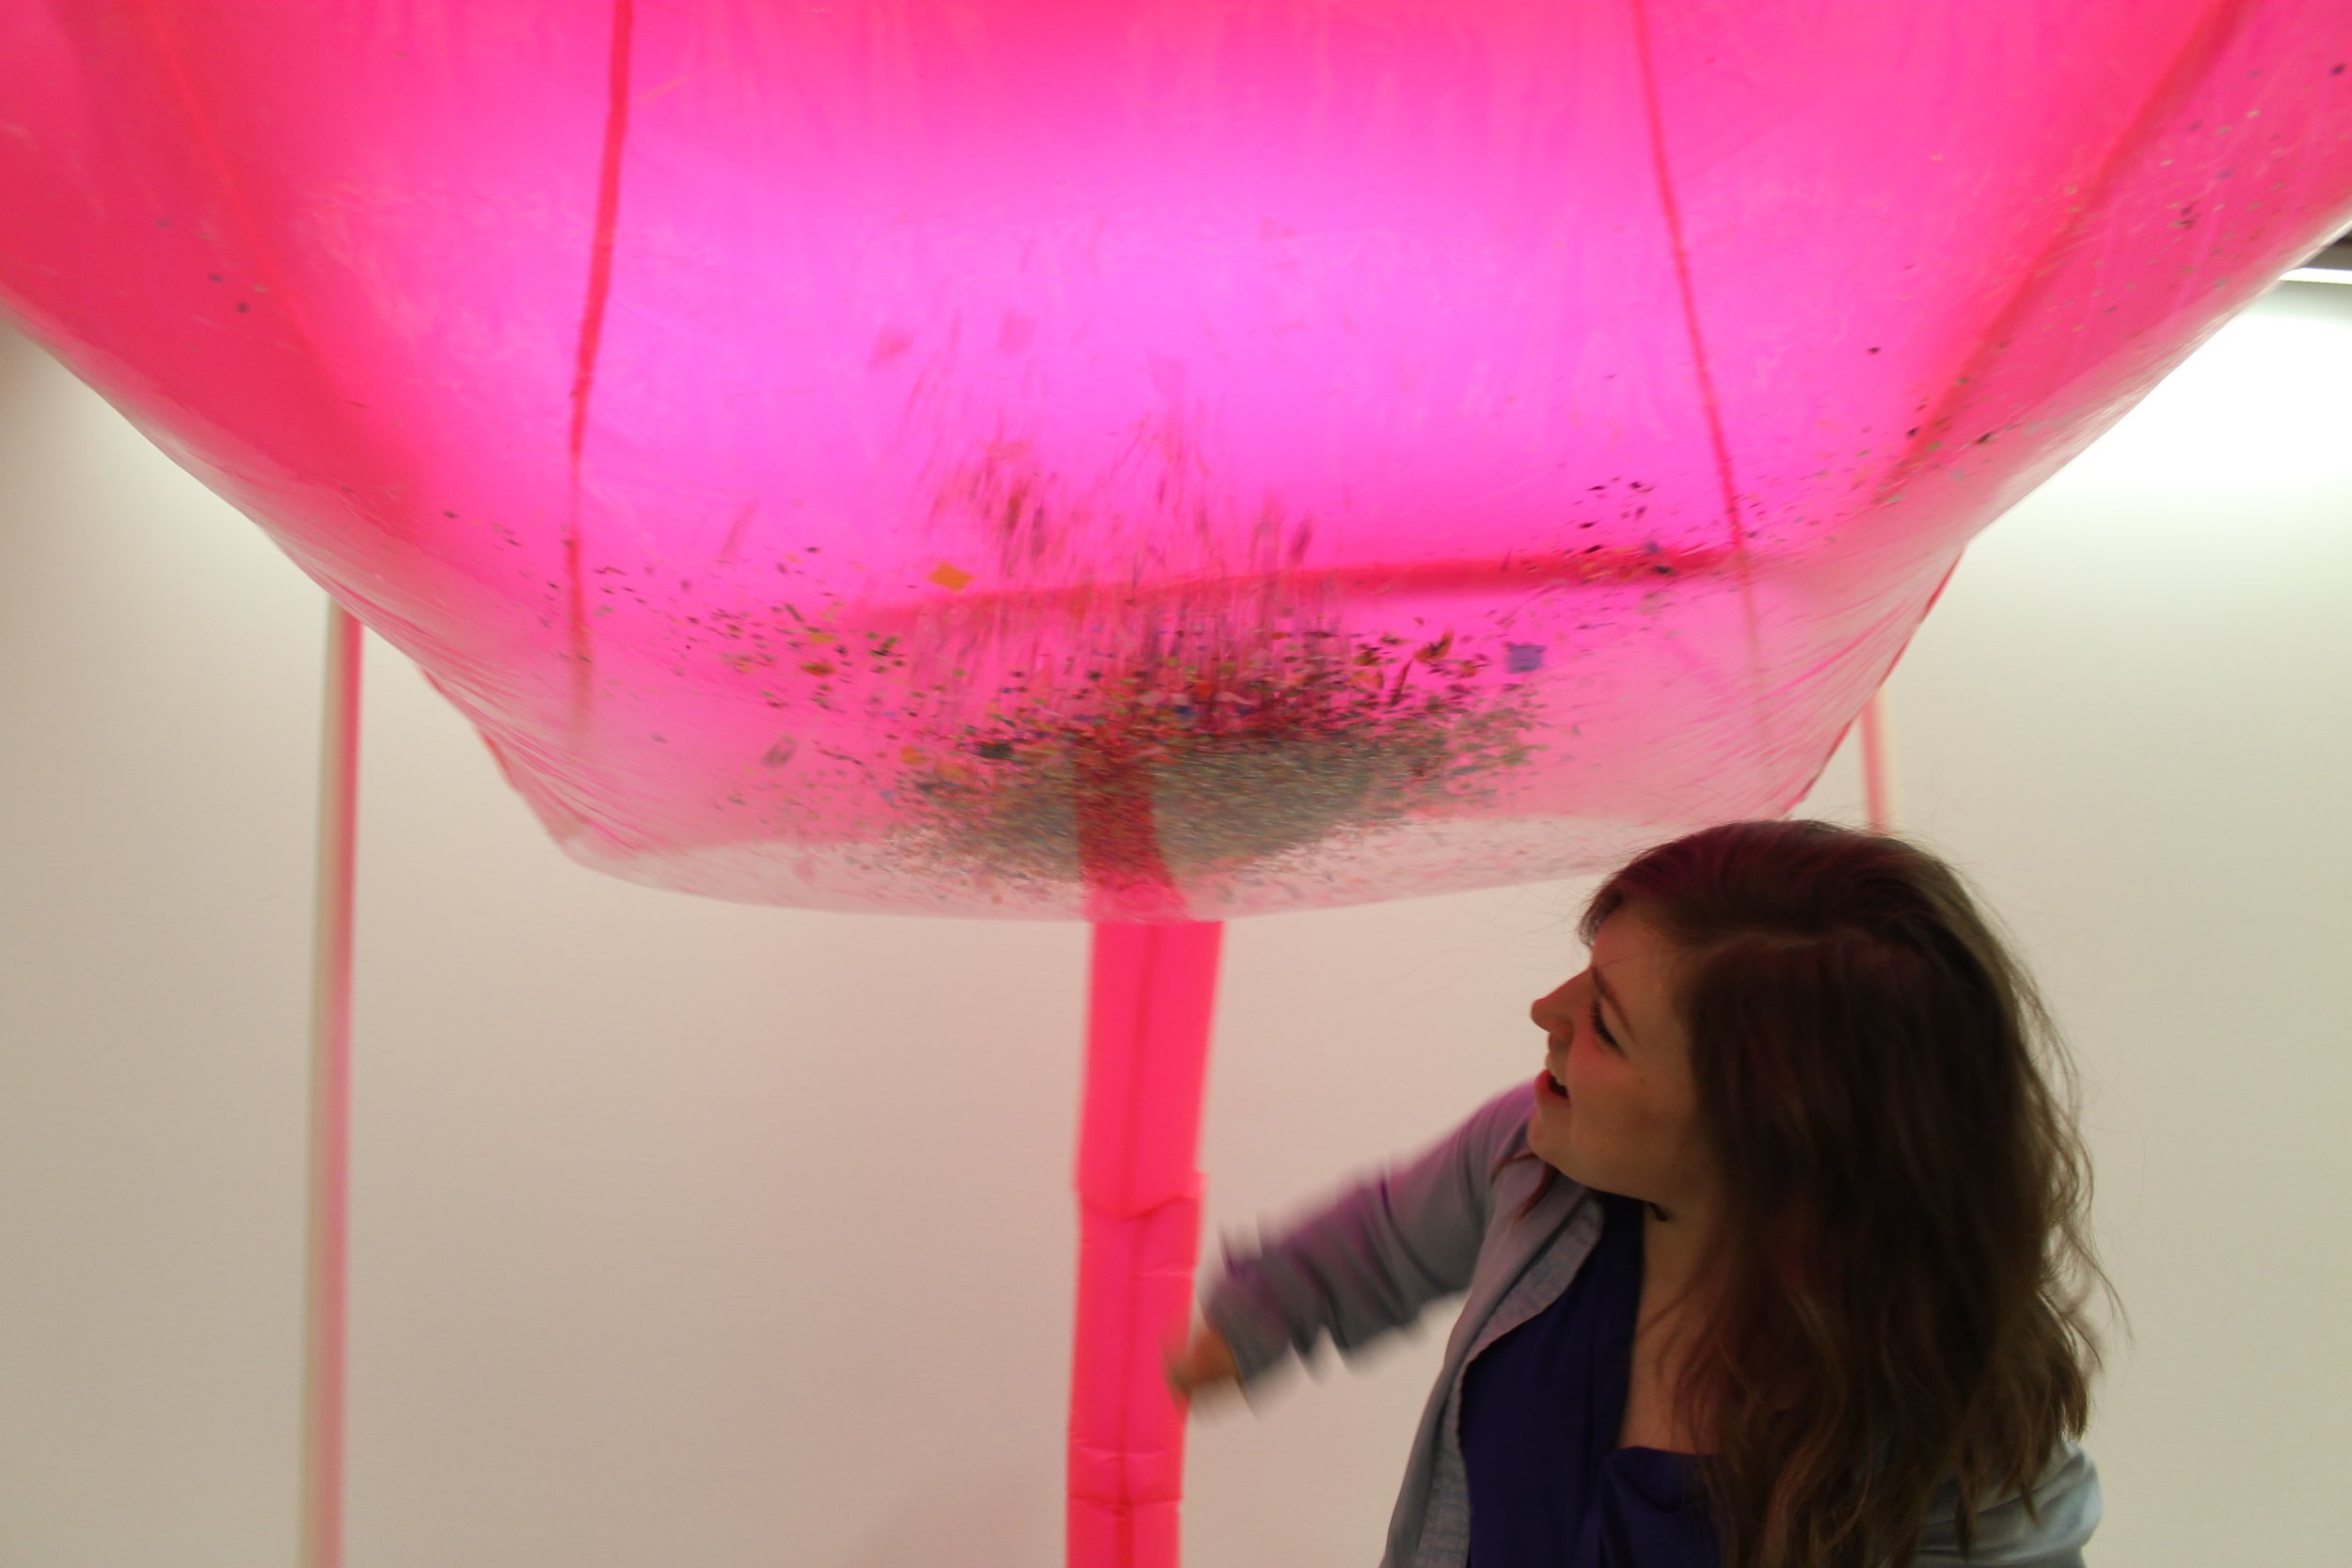 Image: a large pink inflated cube fills the top half of the frame, fed by a central tube; Bri Beck is seen beneath it in the bottom right corner. "Negotiating Space: Othered by Design" by Bri Beck, courtesy of the artist.